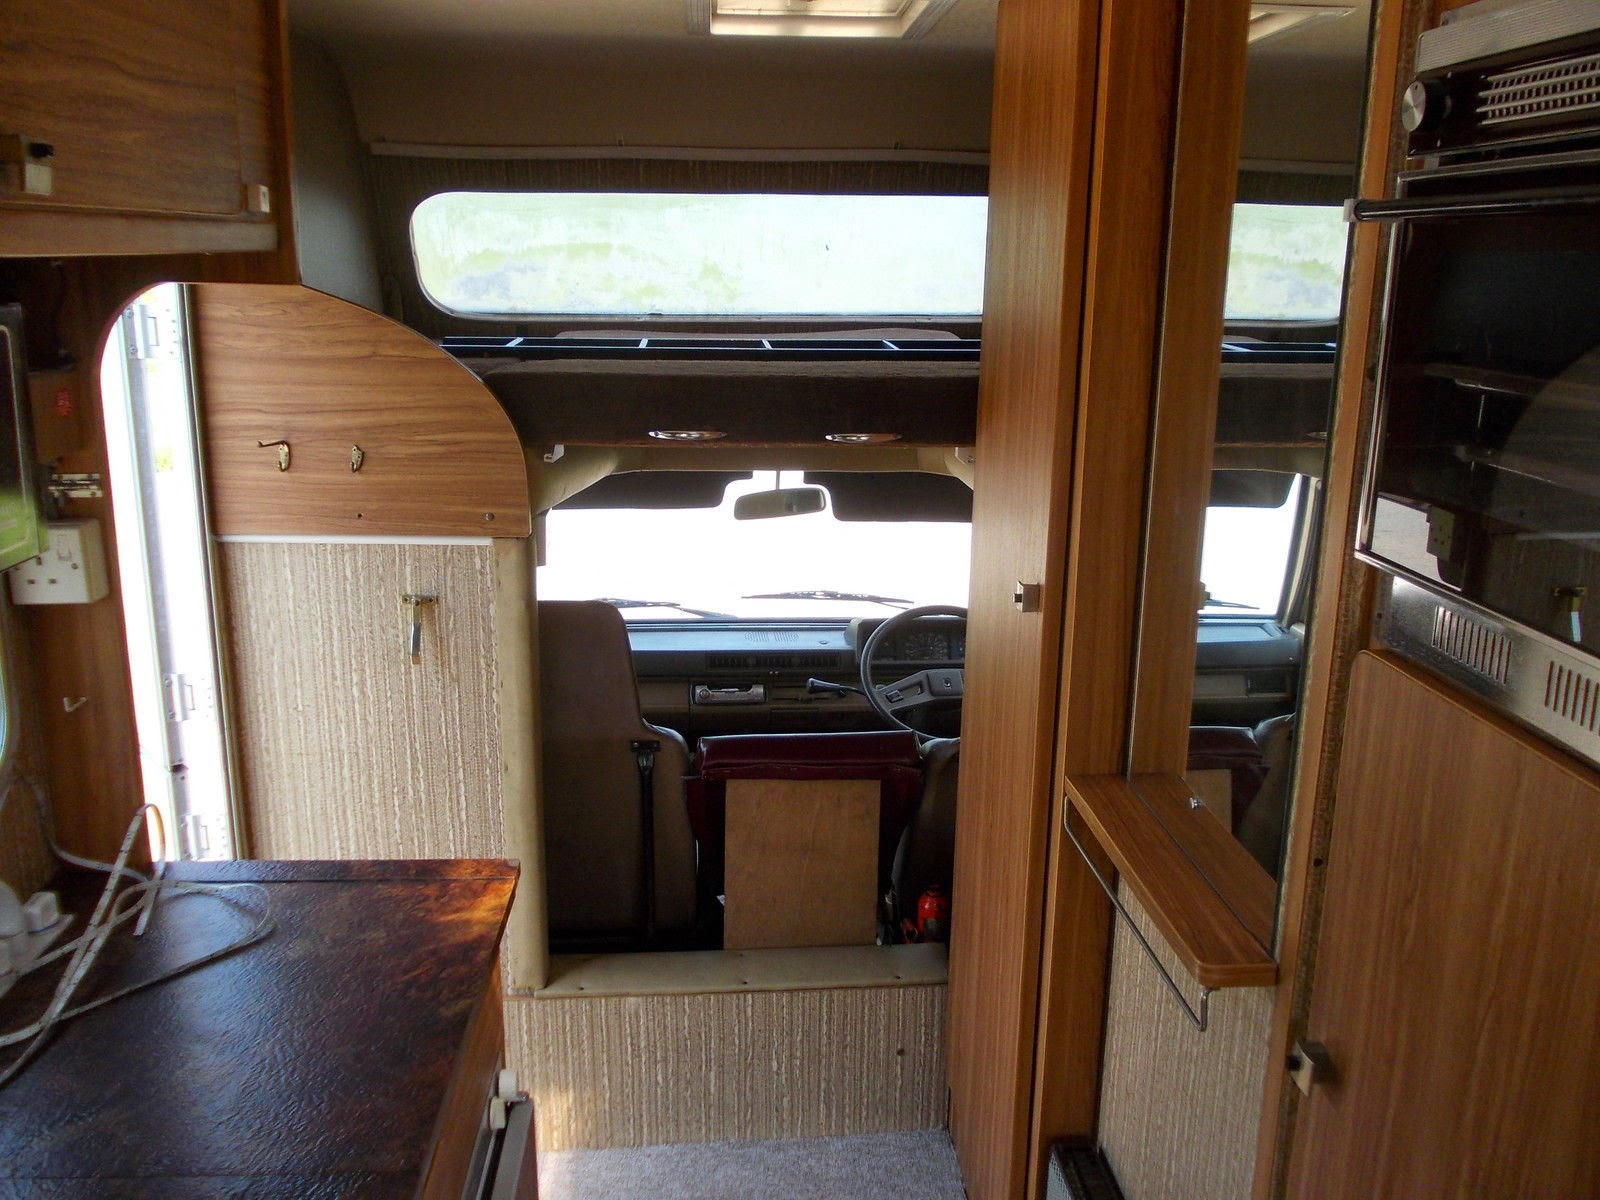 Used RVs Mitsubishi L300 Pioneer Small Motorhome For Sale by Owner